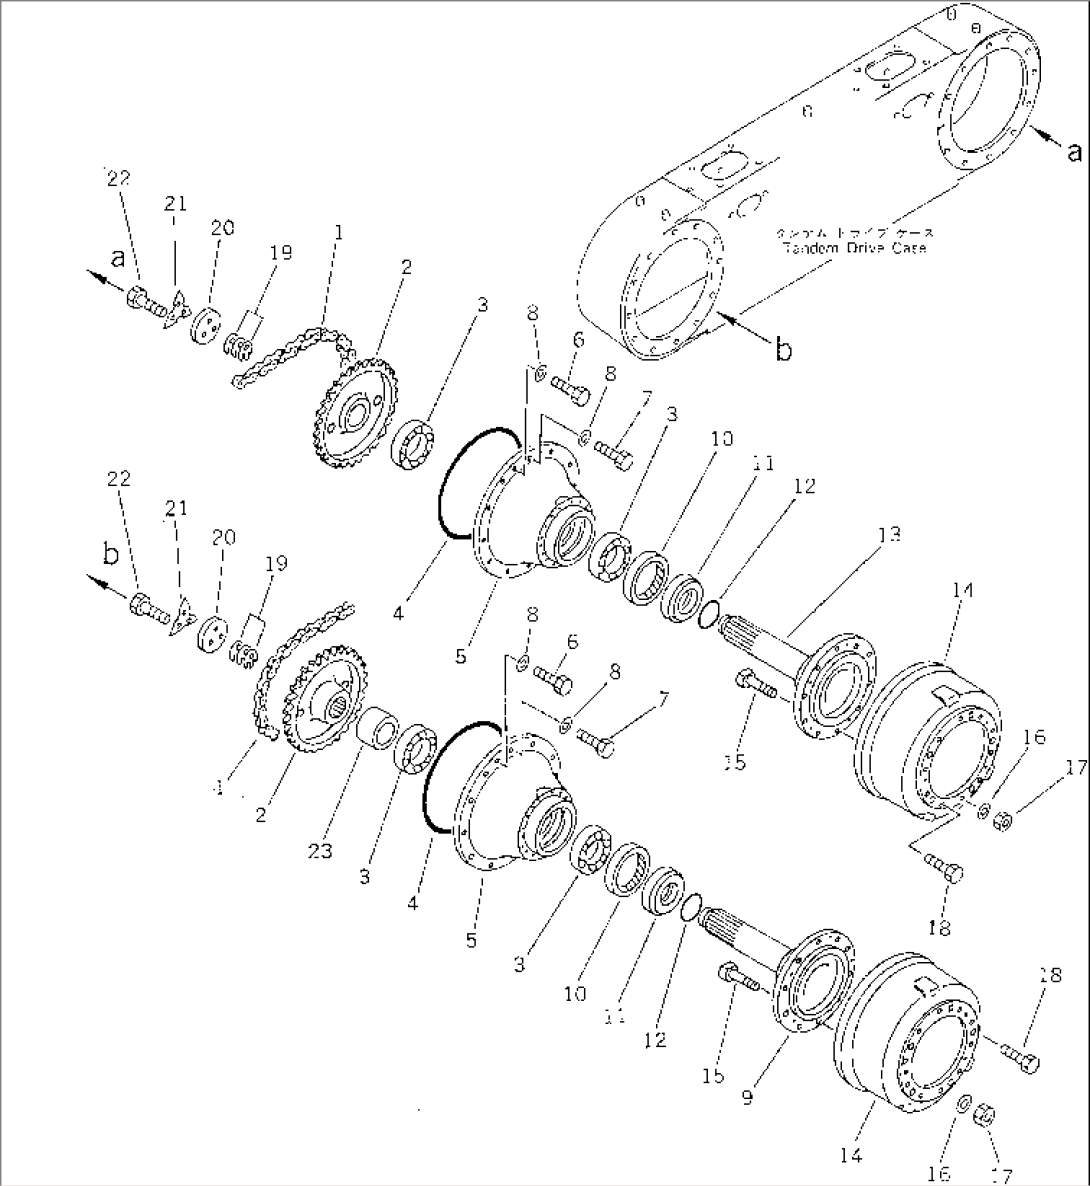 TANDEM DRIVE GEAR AND CHAIN(#15001-15043)